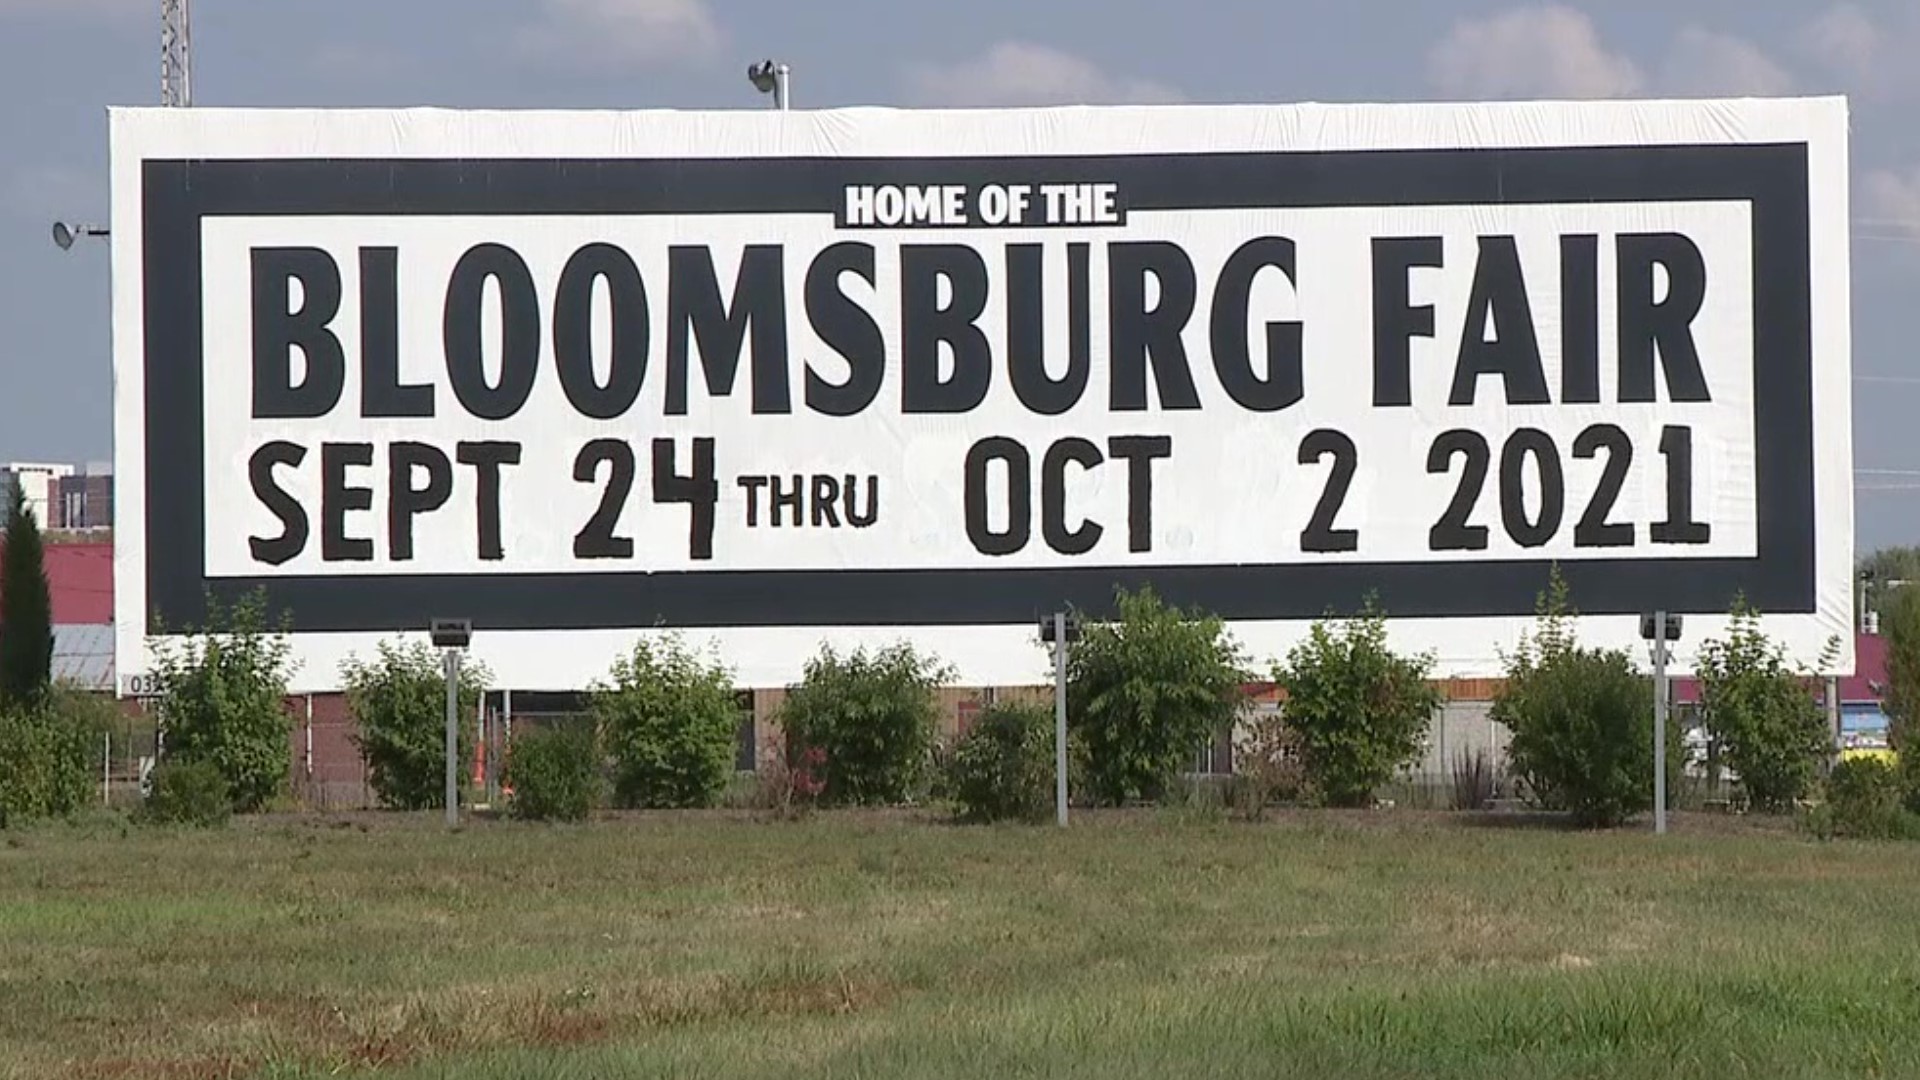 The Bloomsburg Fair is a big part of many people's lives and it's a tradition for them to attend.